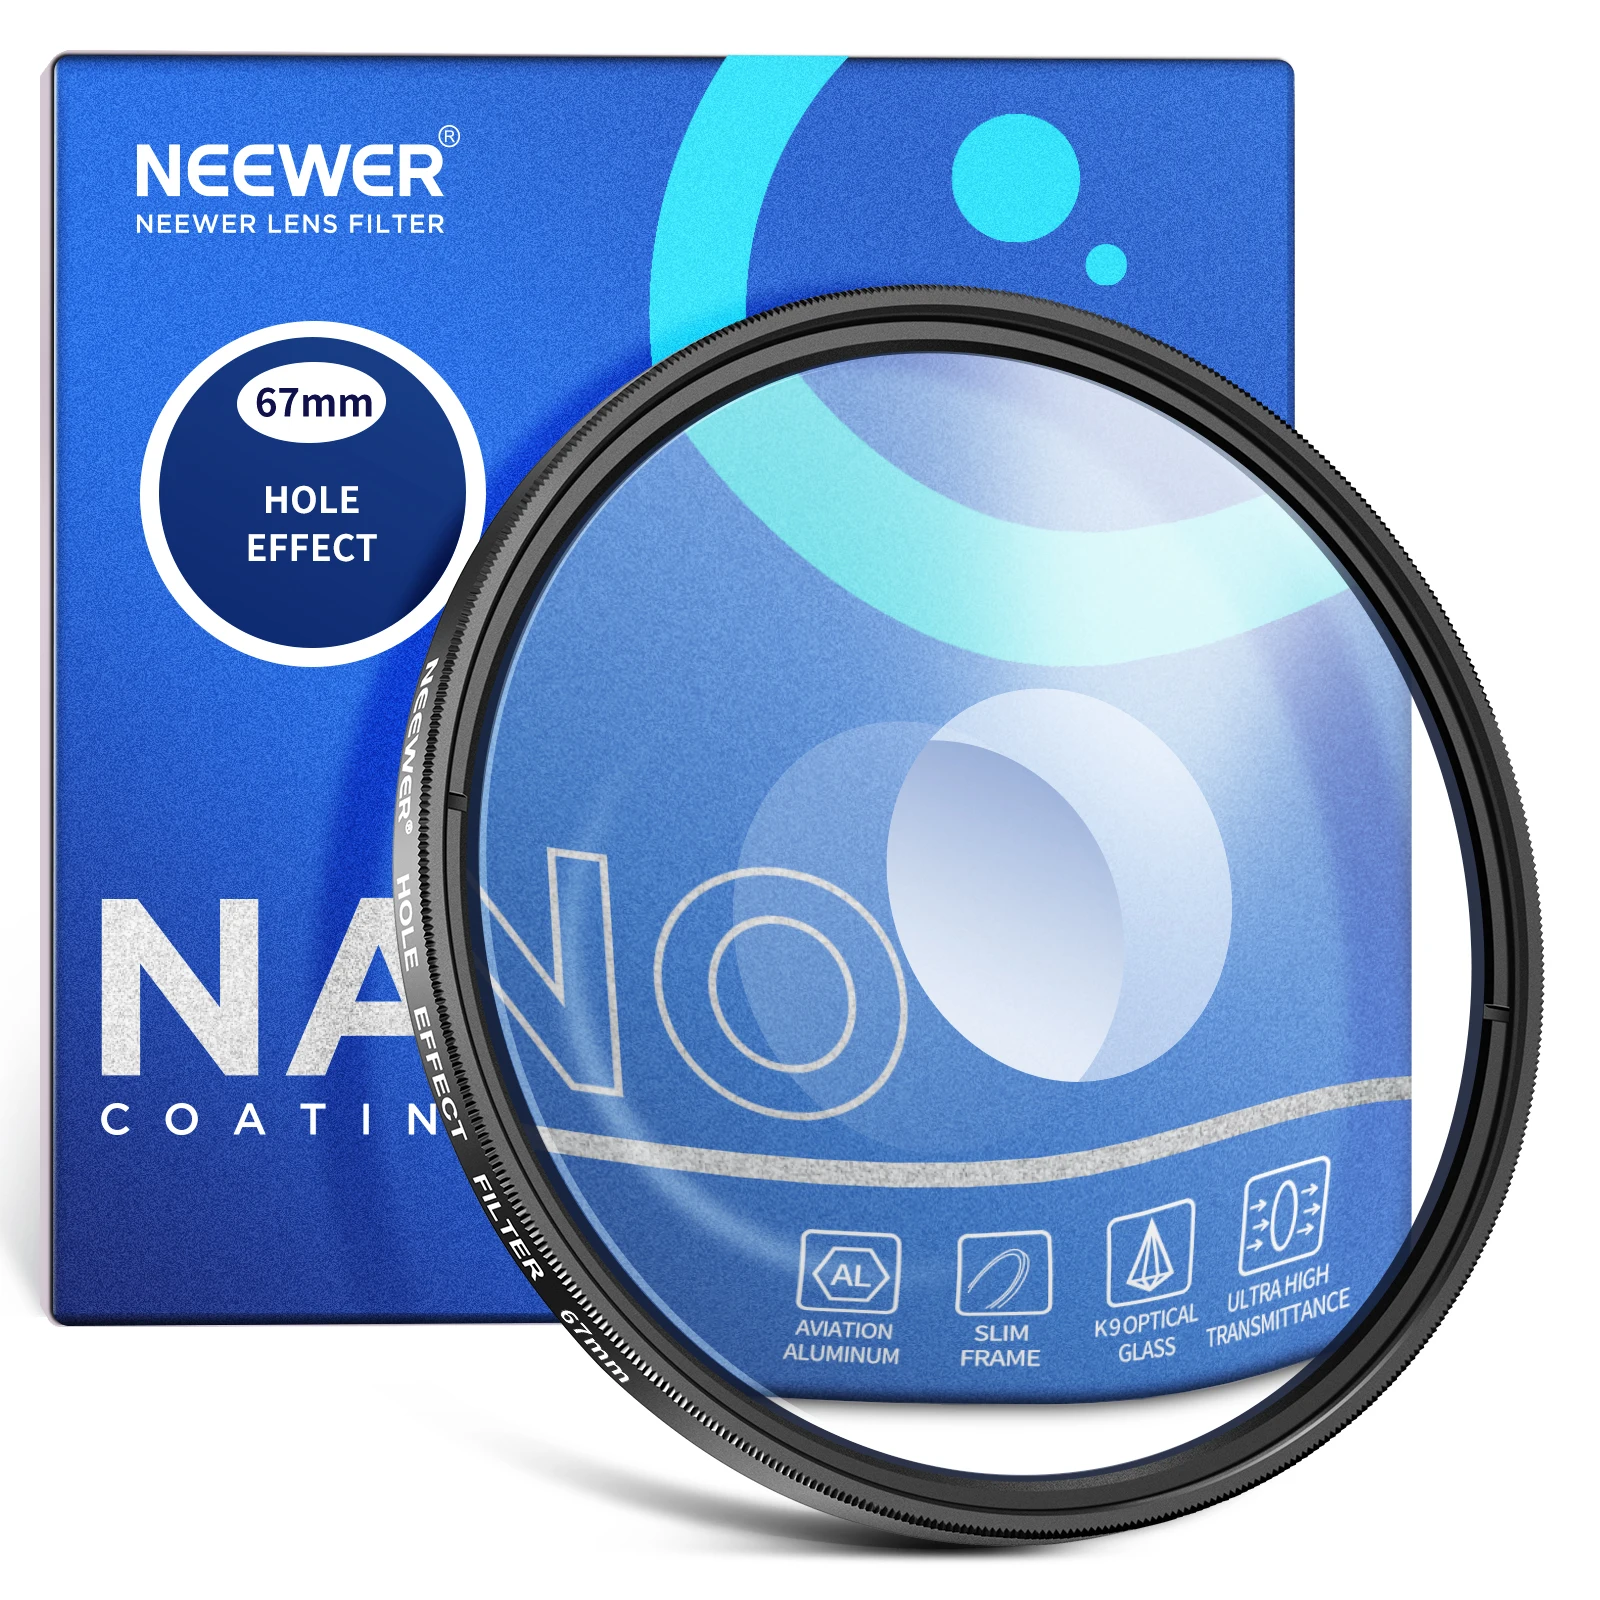 

NEEWER Spiral Halo Camera Lens Filter, Prism K9 Optical Glass Special Effects Filter Photography Camera Lens Accessories